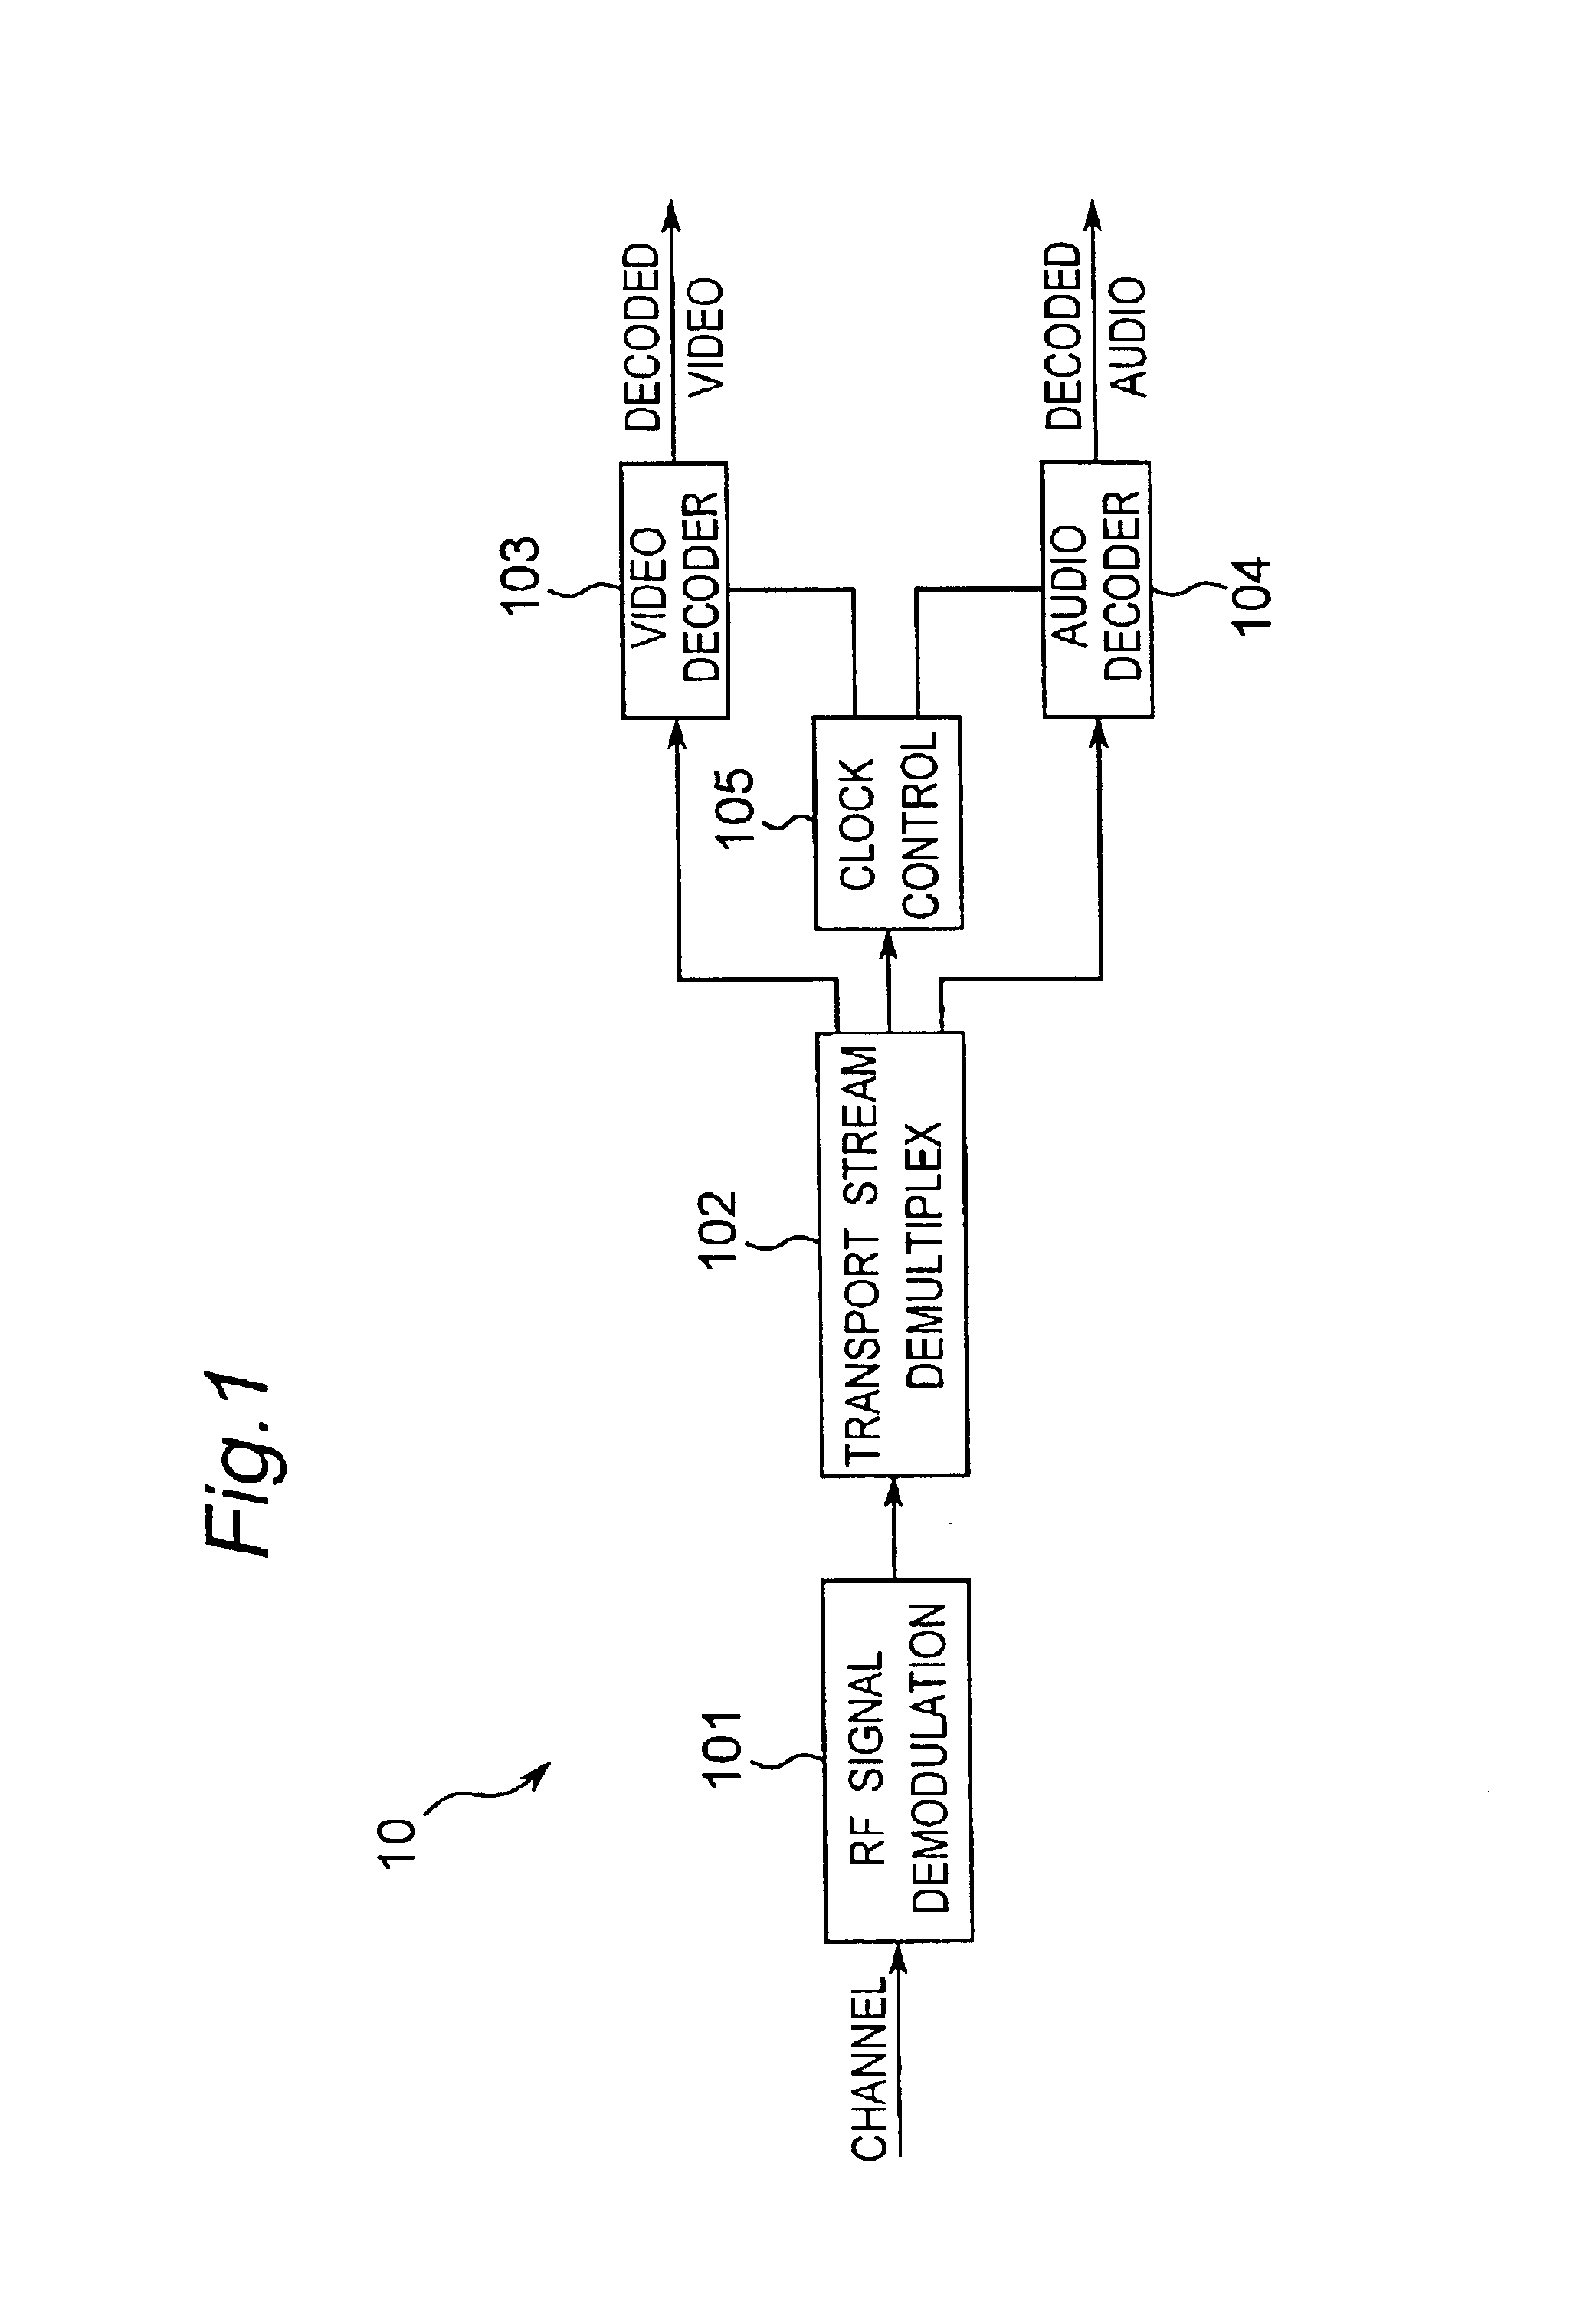 Method of MPEG-2 video variable length decoding in software